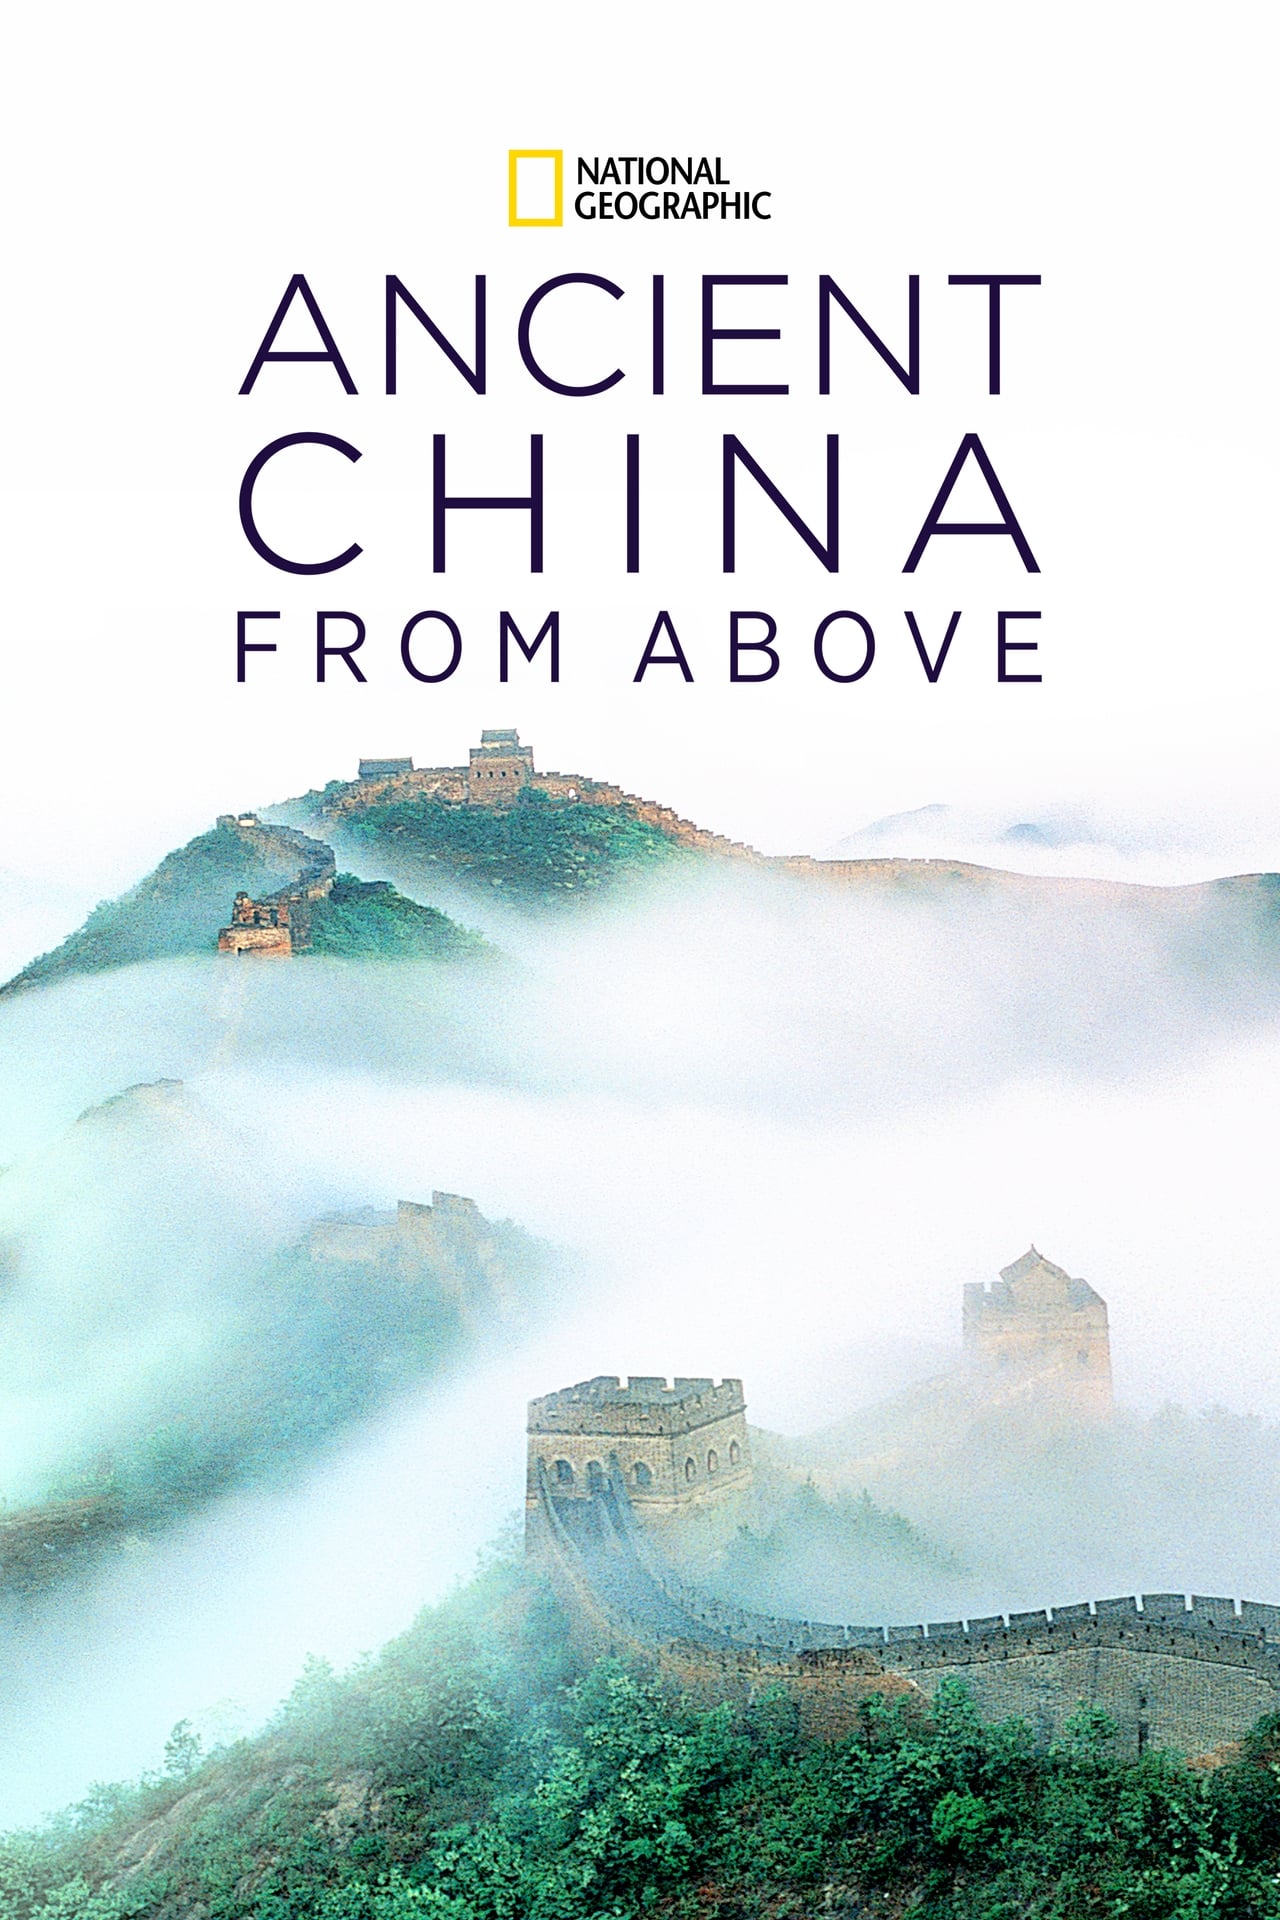 Ancient China From Above (2020) S1 EP01&EP03 128Kbps 29.970Fps 48Khz 2.0Ch Disney+ DD+ E-AC3 Turkish Audio TAC